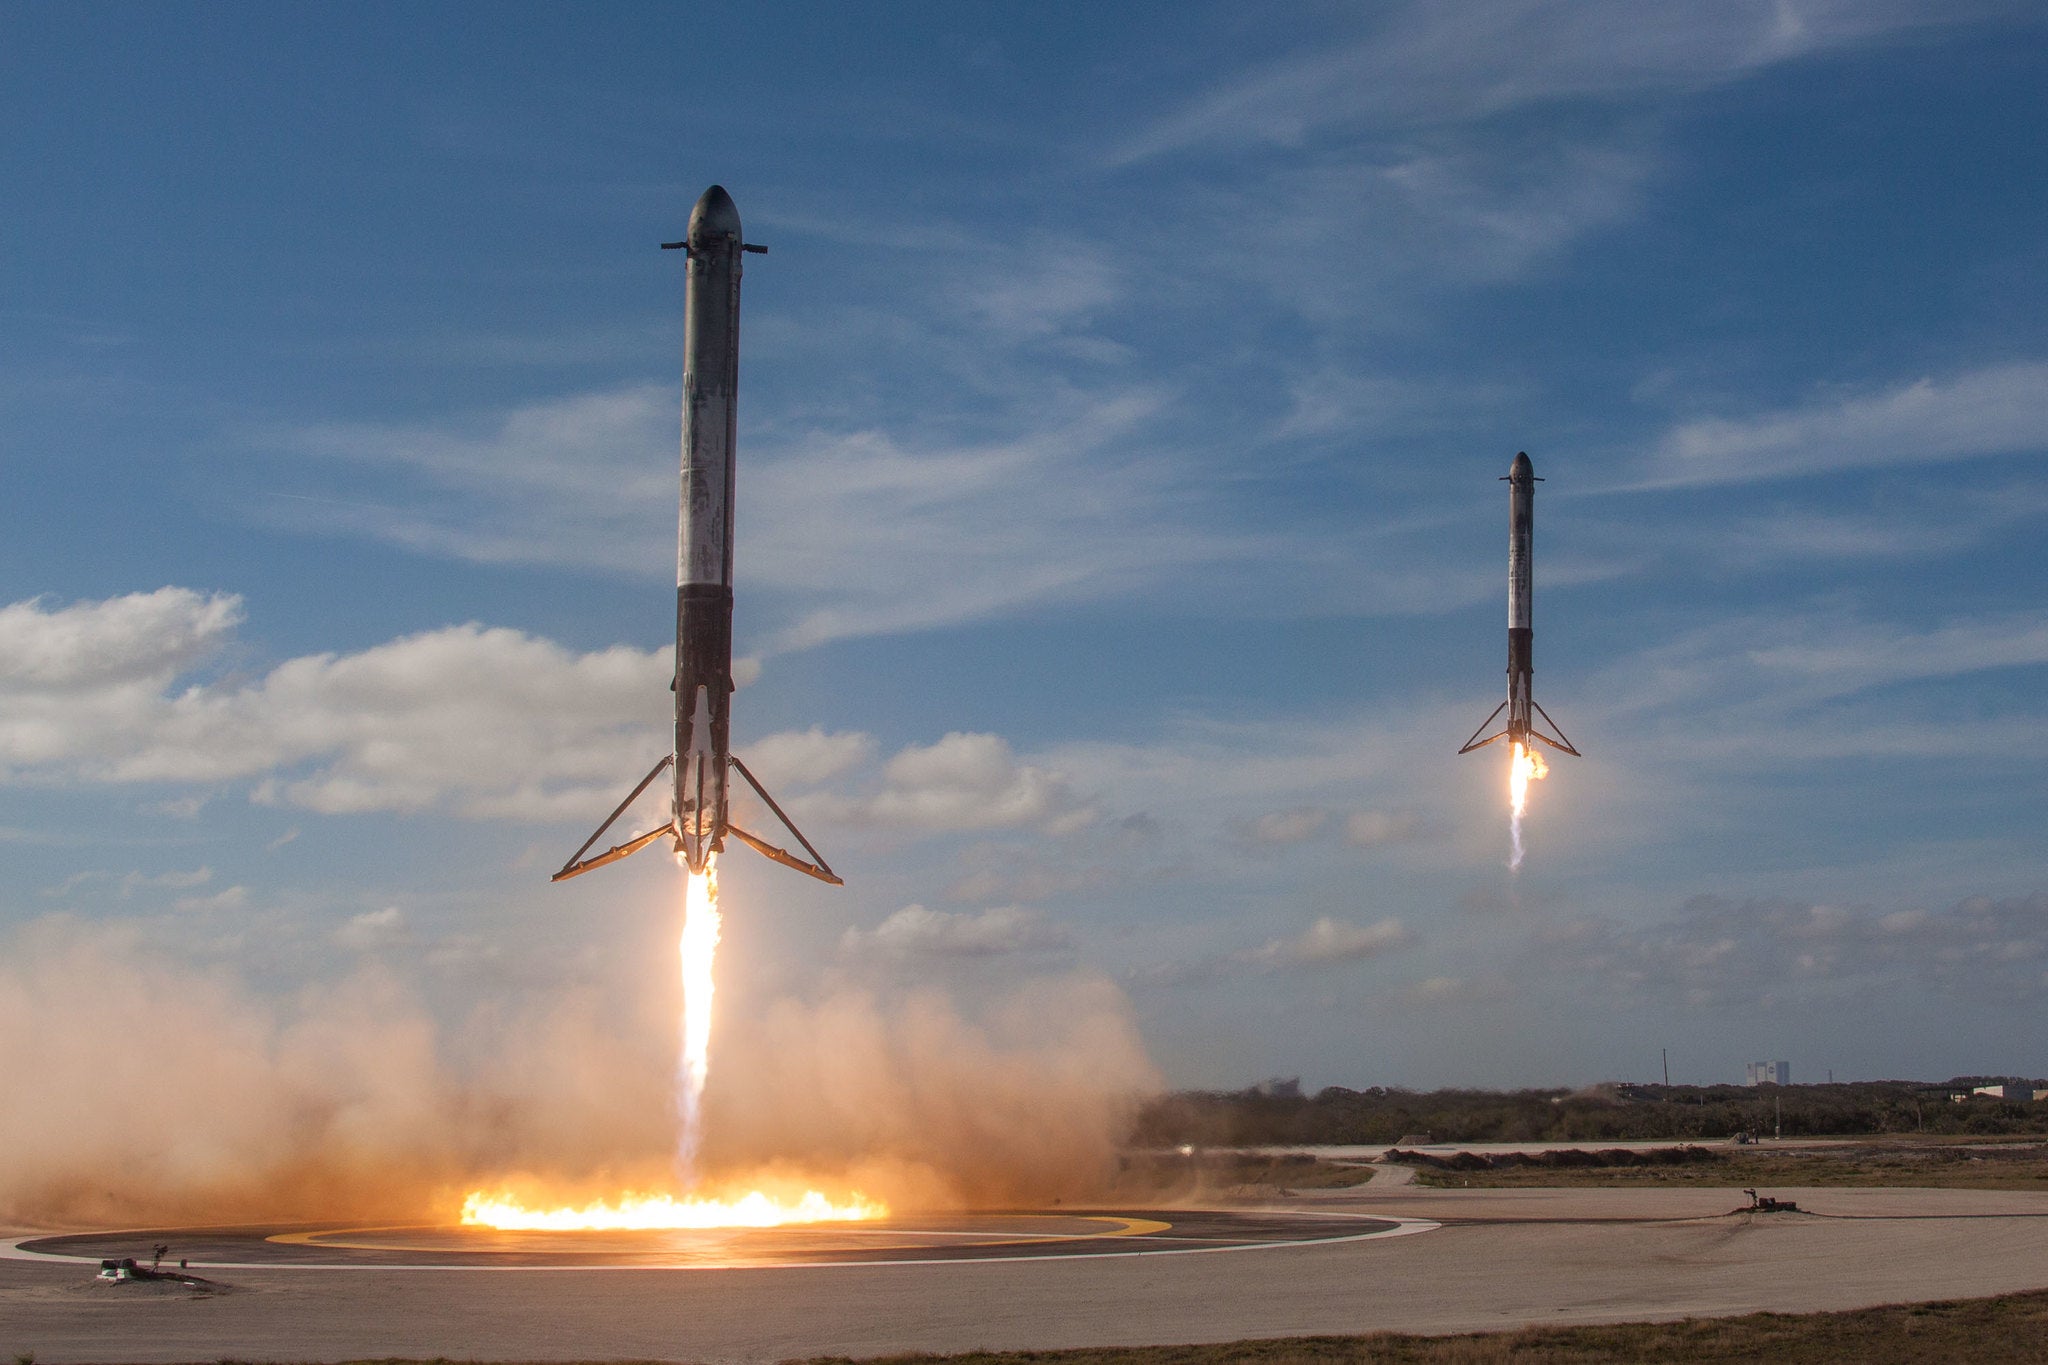 Falcon Heavy side boosters landing in tandem during the demo mission on February 6, 2018. (Photo: SpaceX)